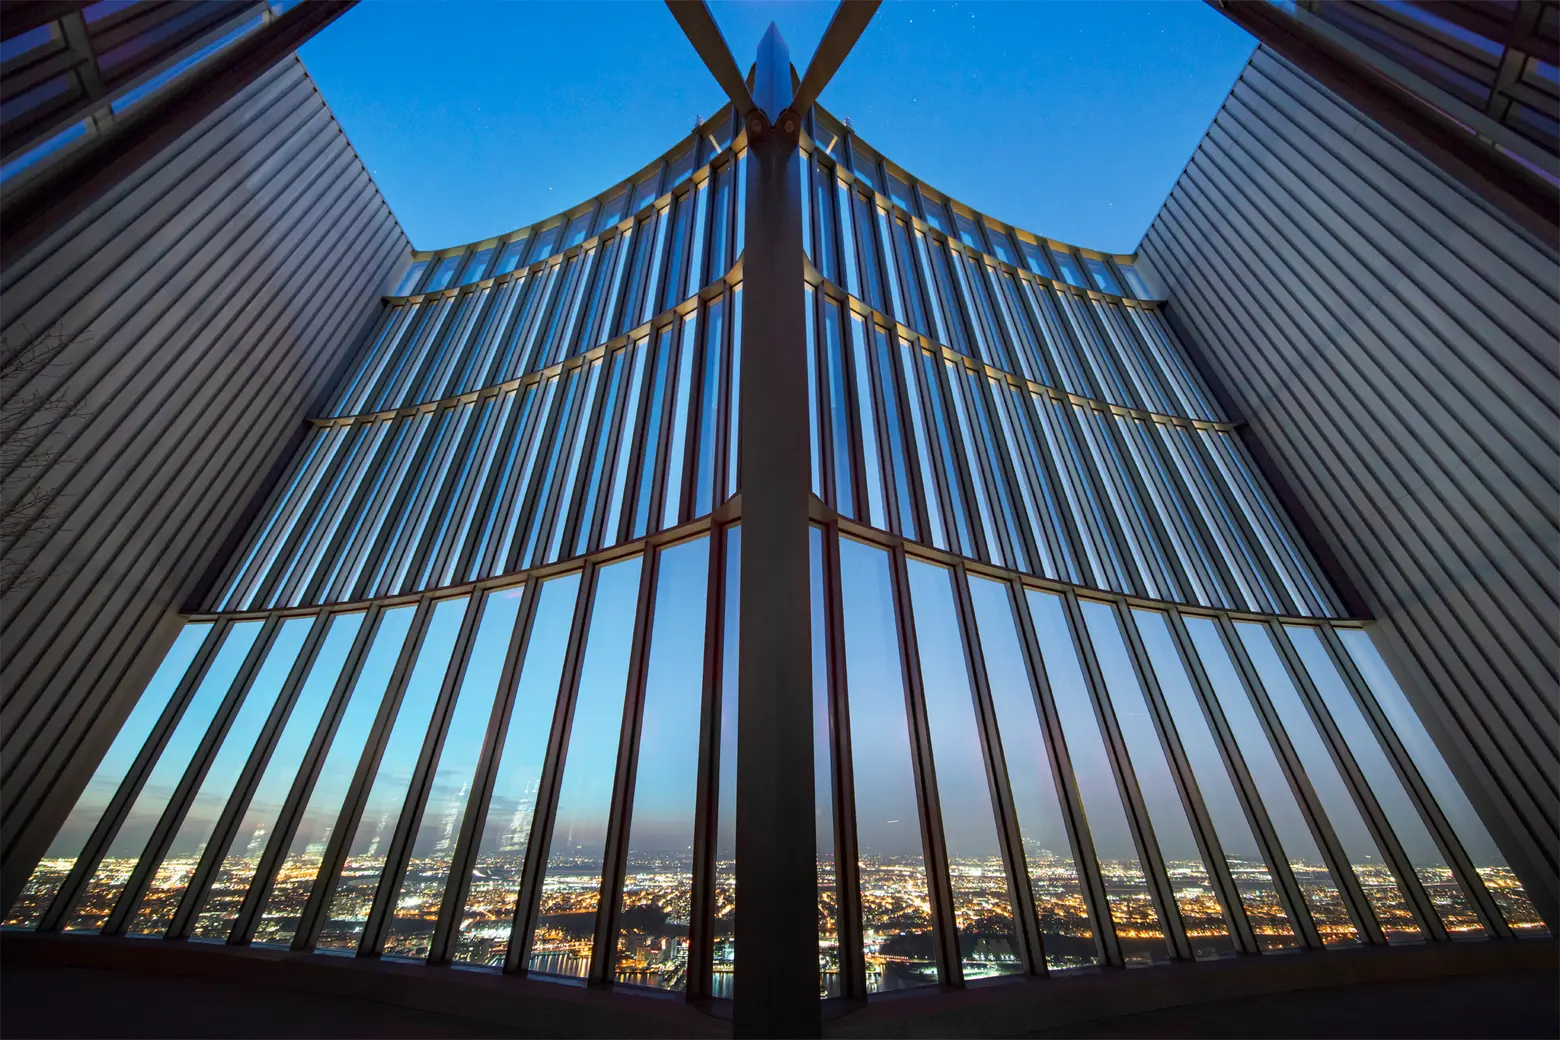 See the views from NYC’s highest outdoor residential space at 15 Hudson Yards